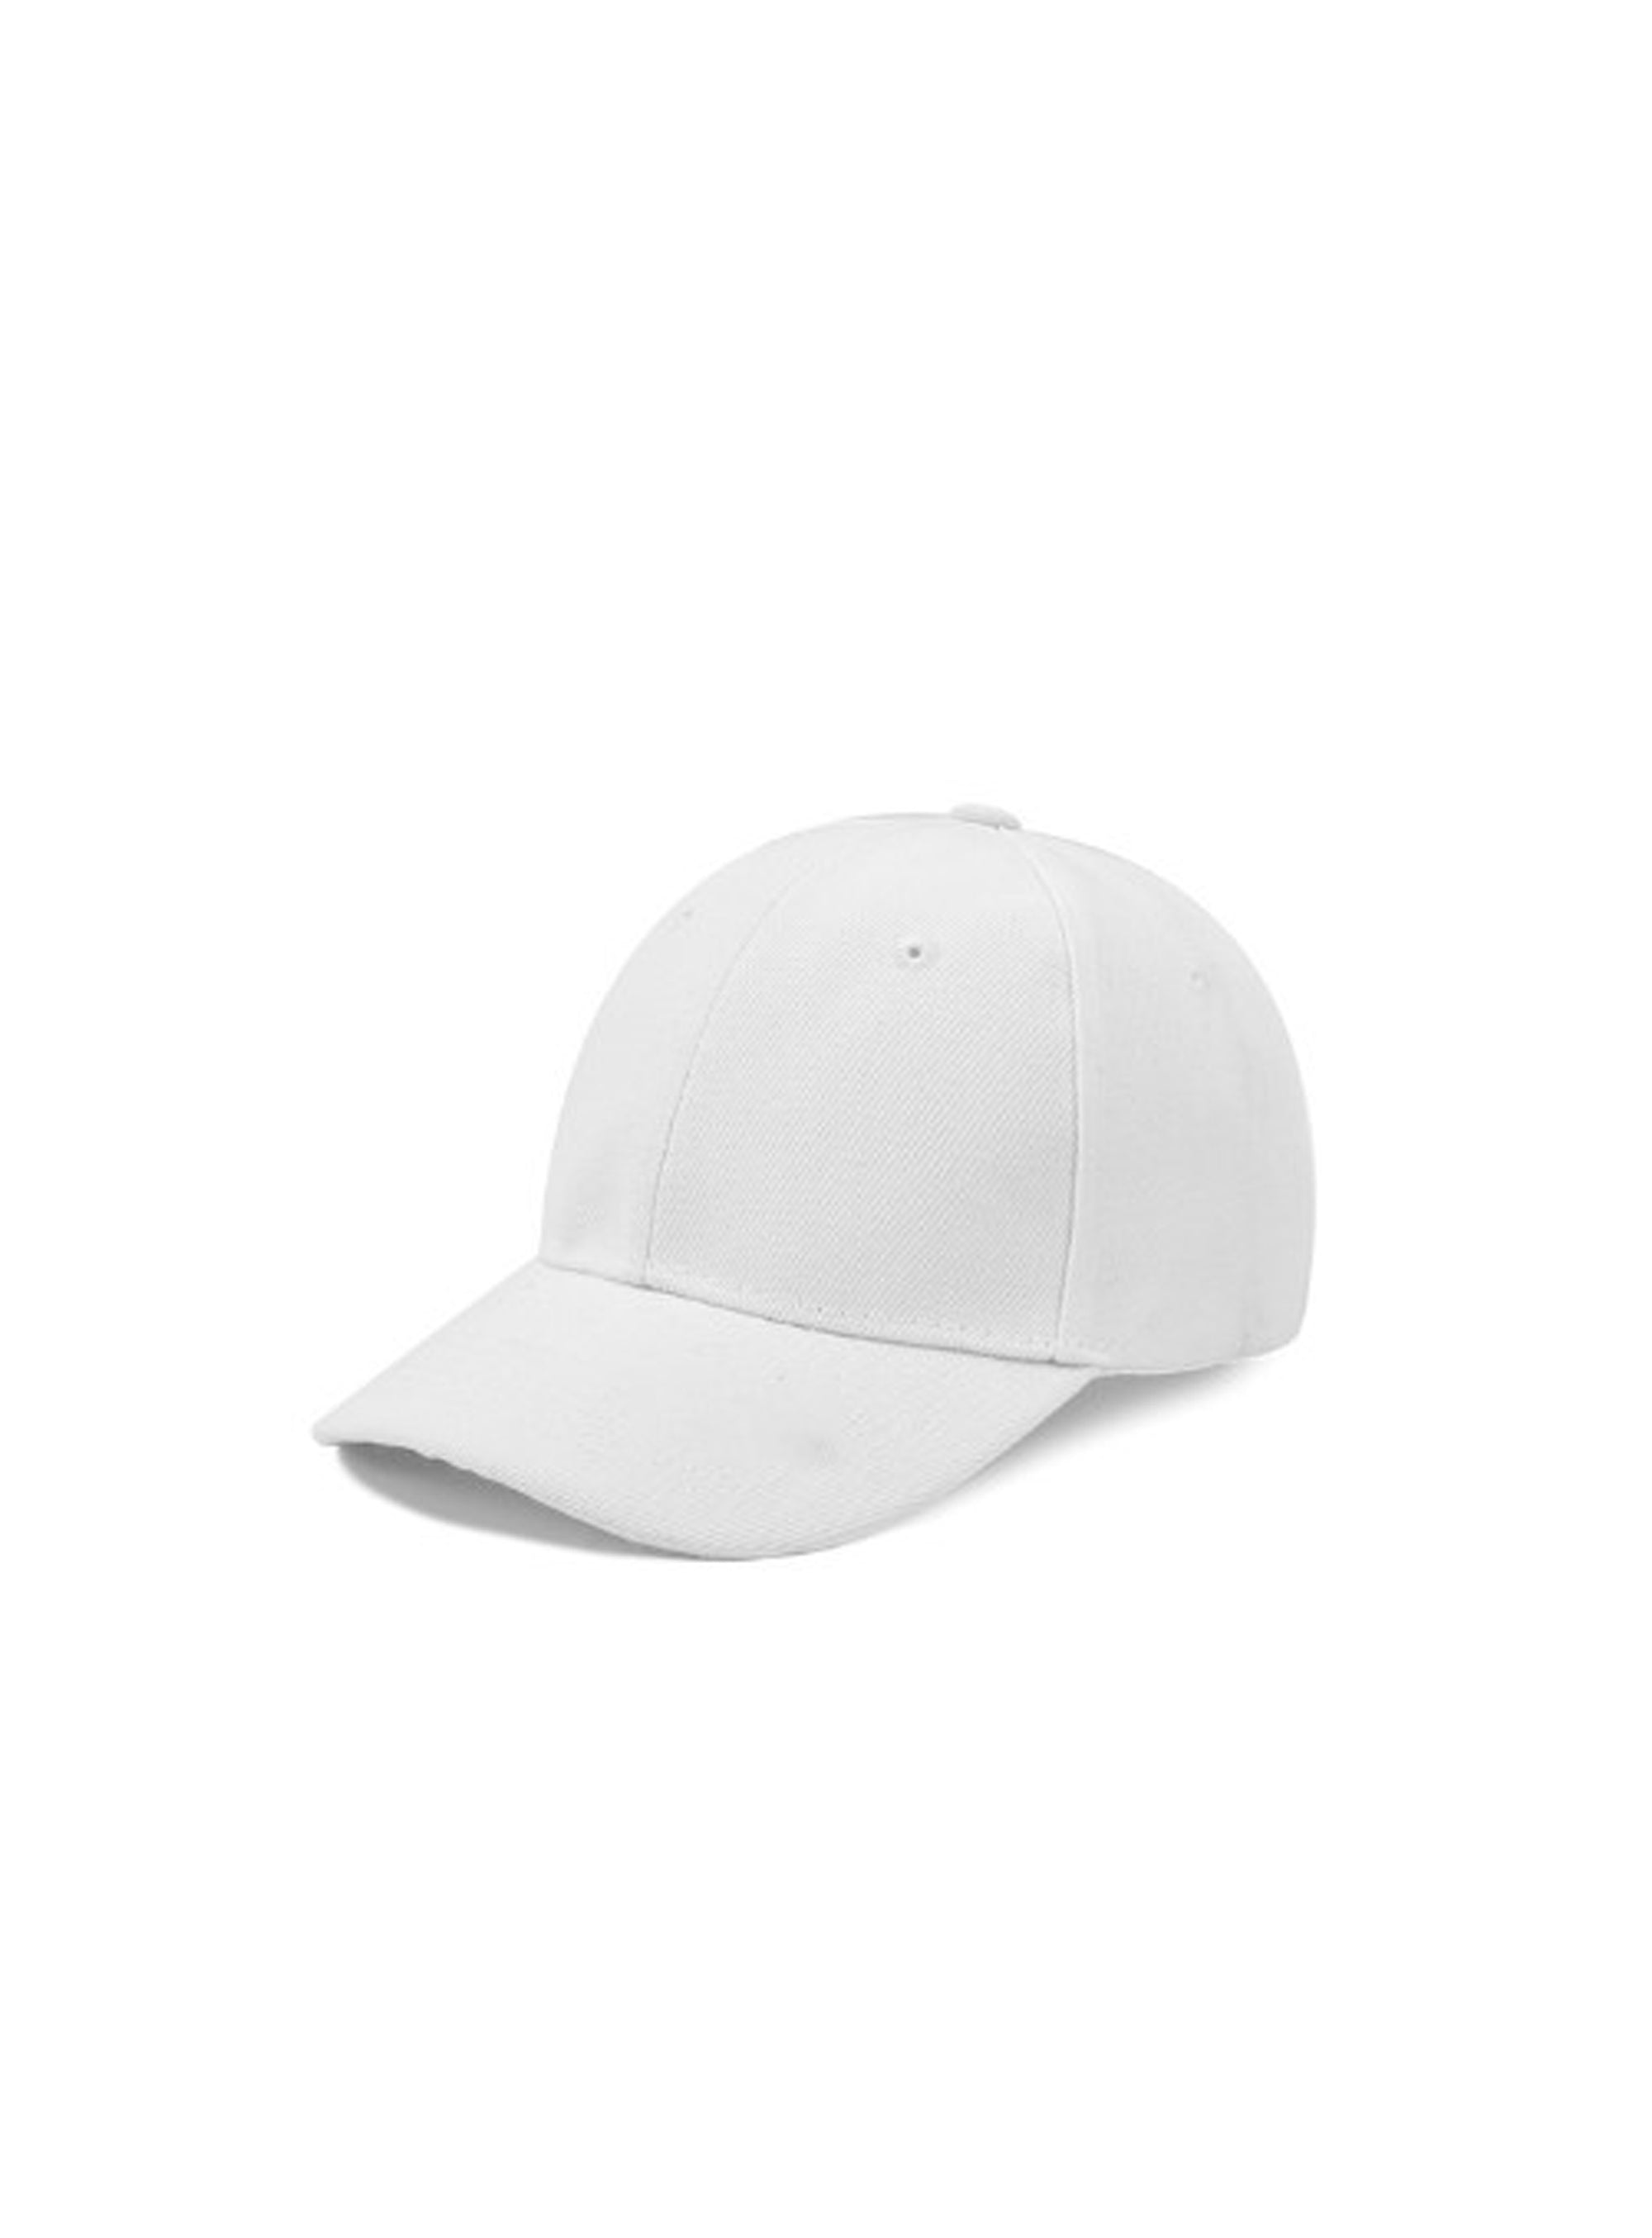 pearl white cap with adjustable strap